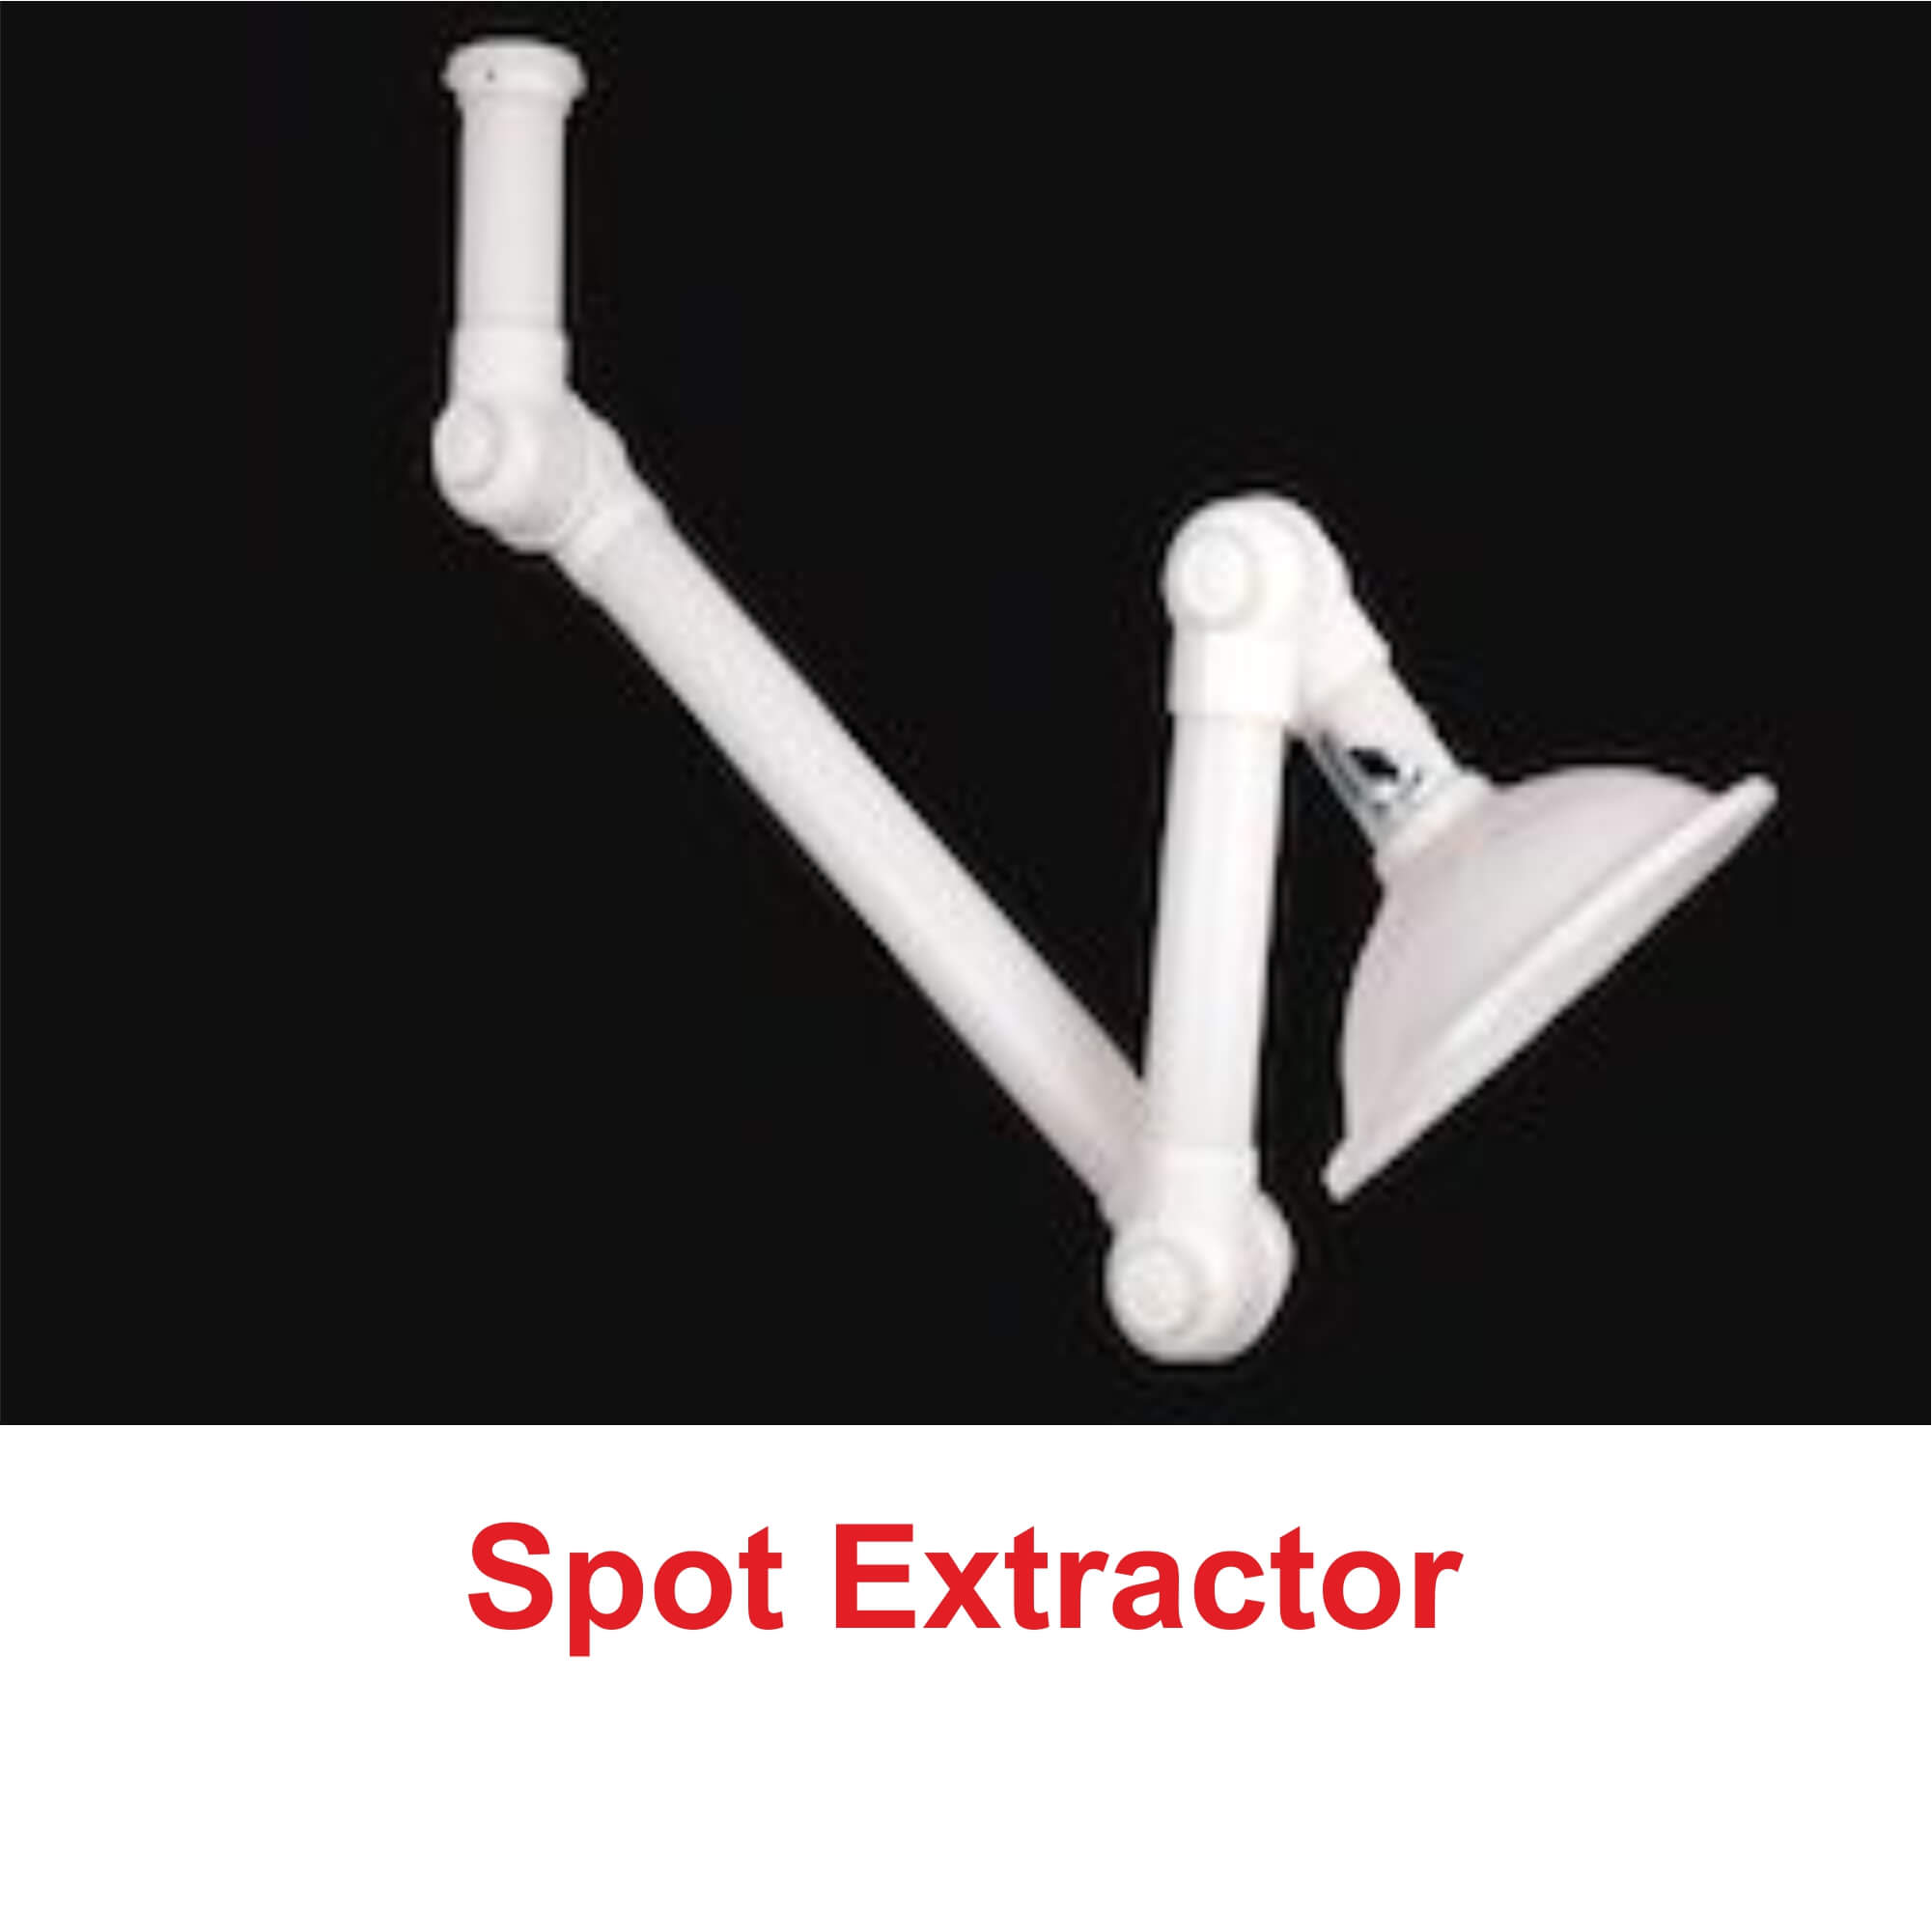 Spot Extractor Manufacturer in India